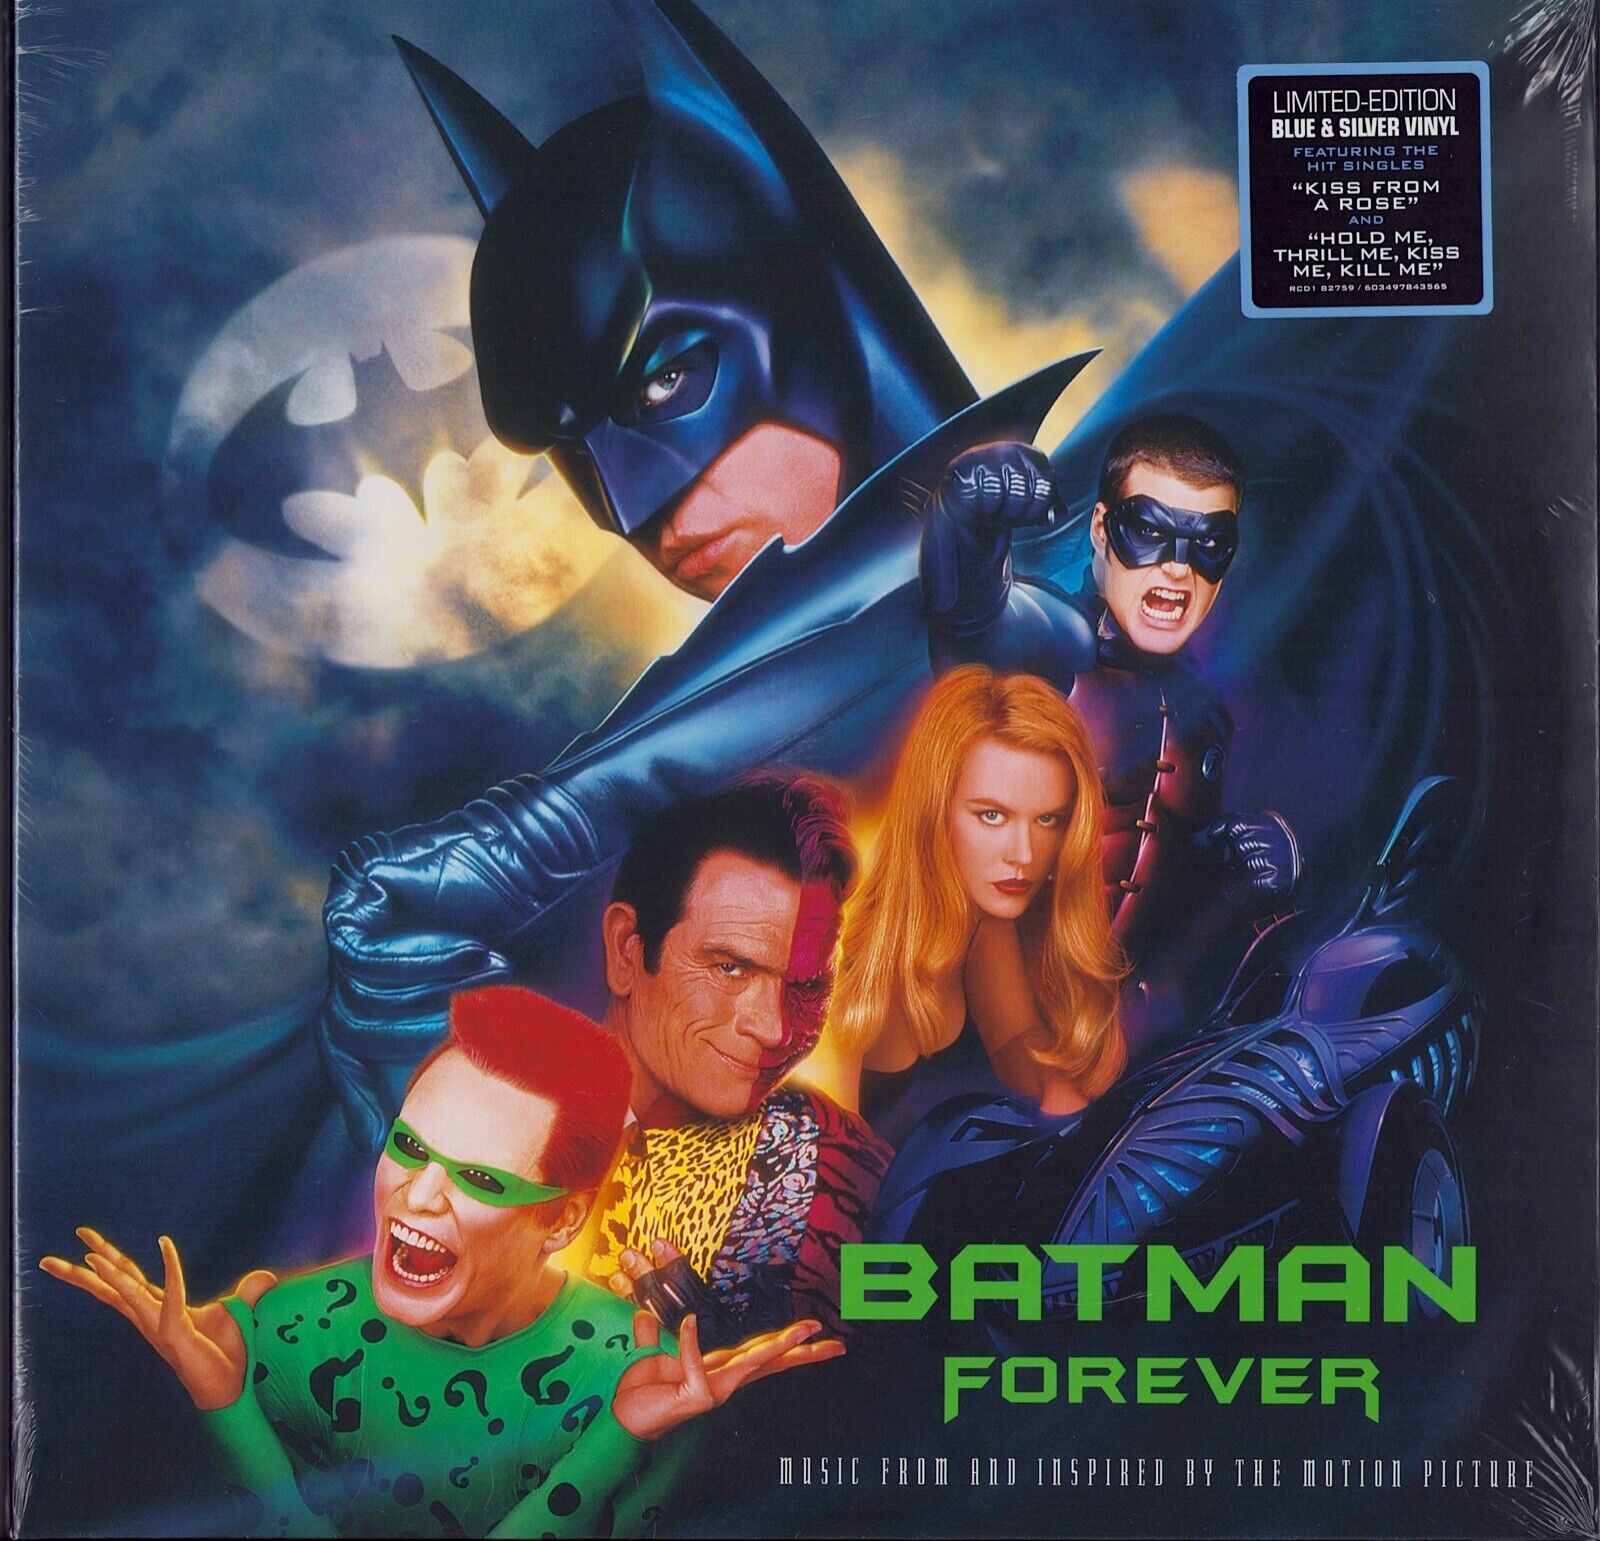 Batman Forever Music From And Inspired By The Motion Picture Blue & Silver Vinyl 2LP